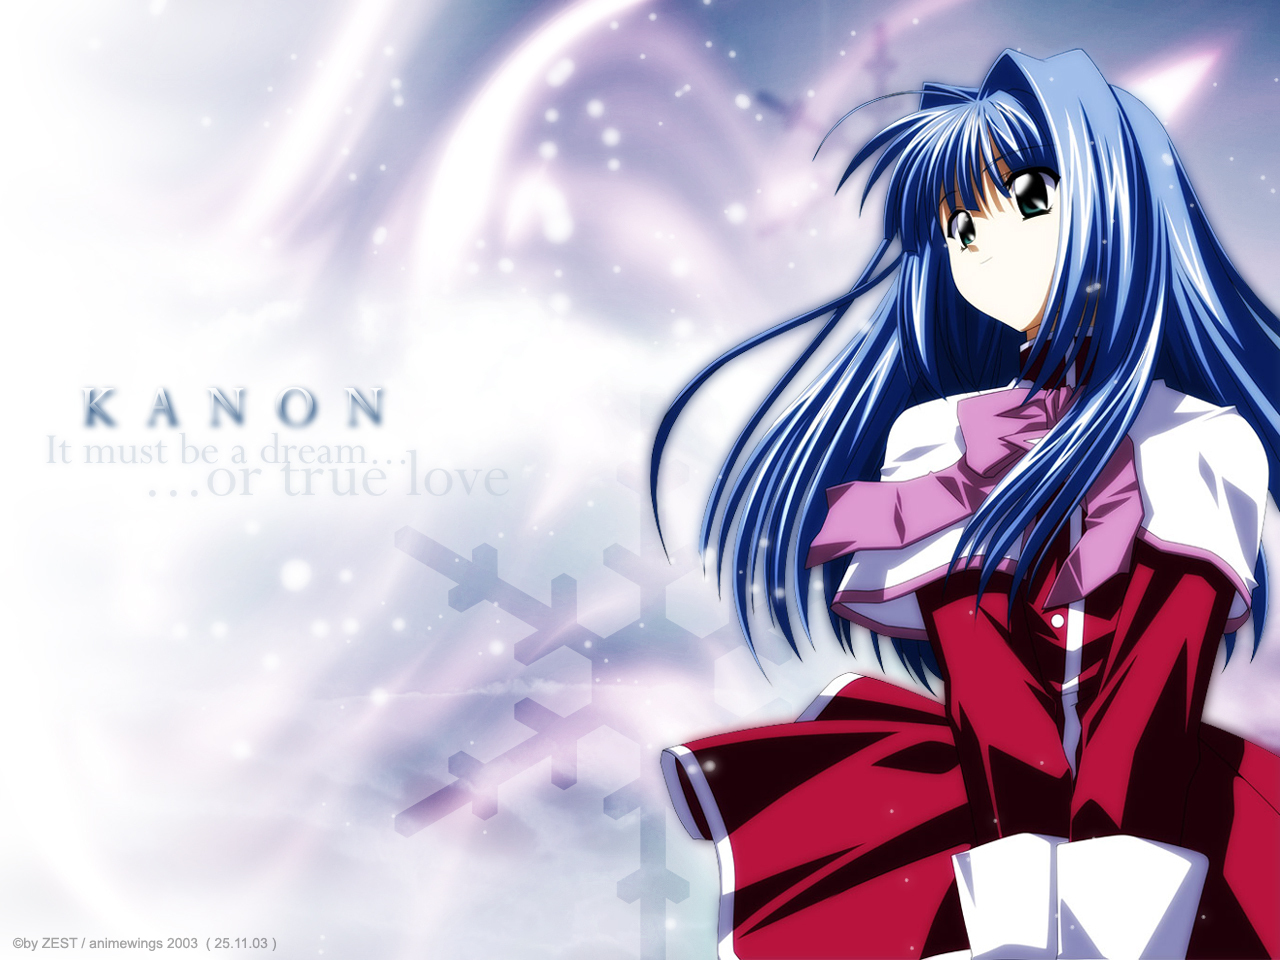 Kanon Image Old Stuff It Must Be A Dream HD Wallpaper